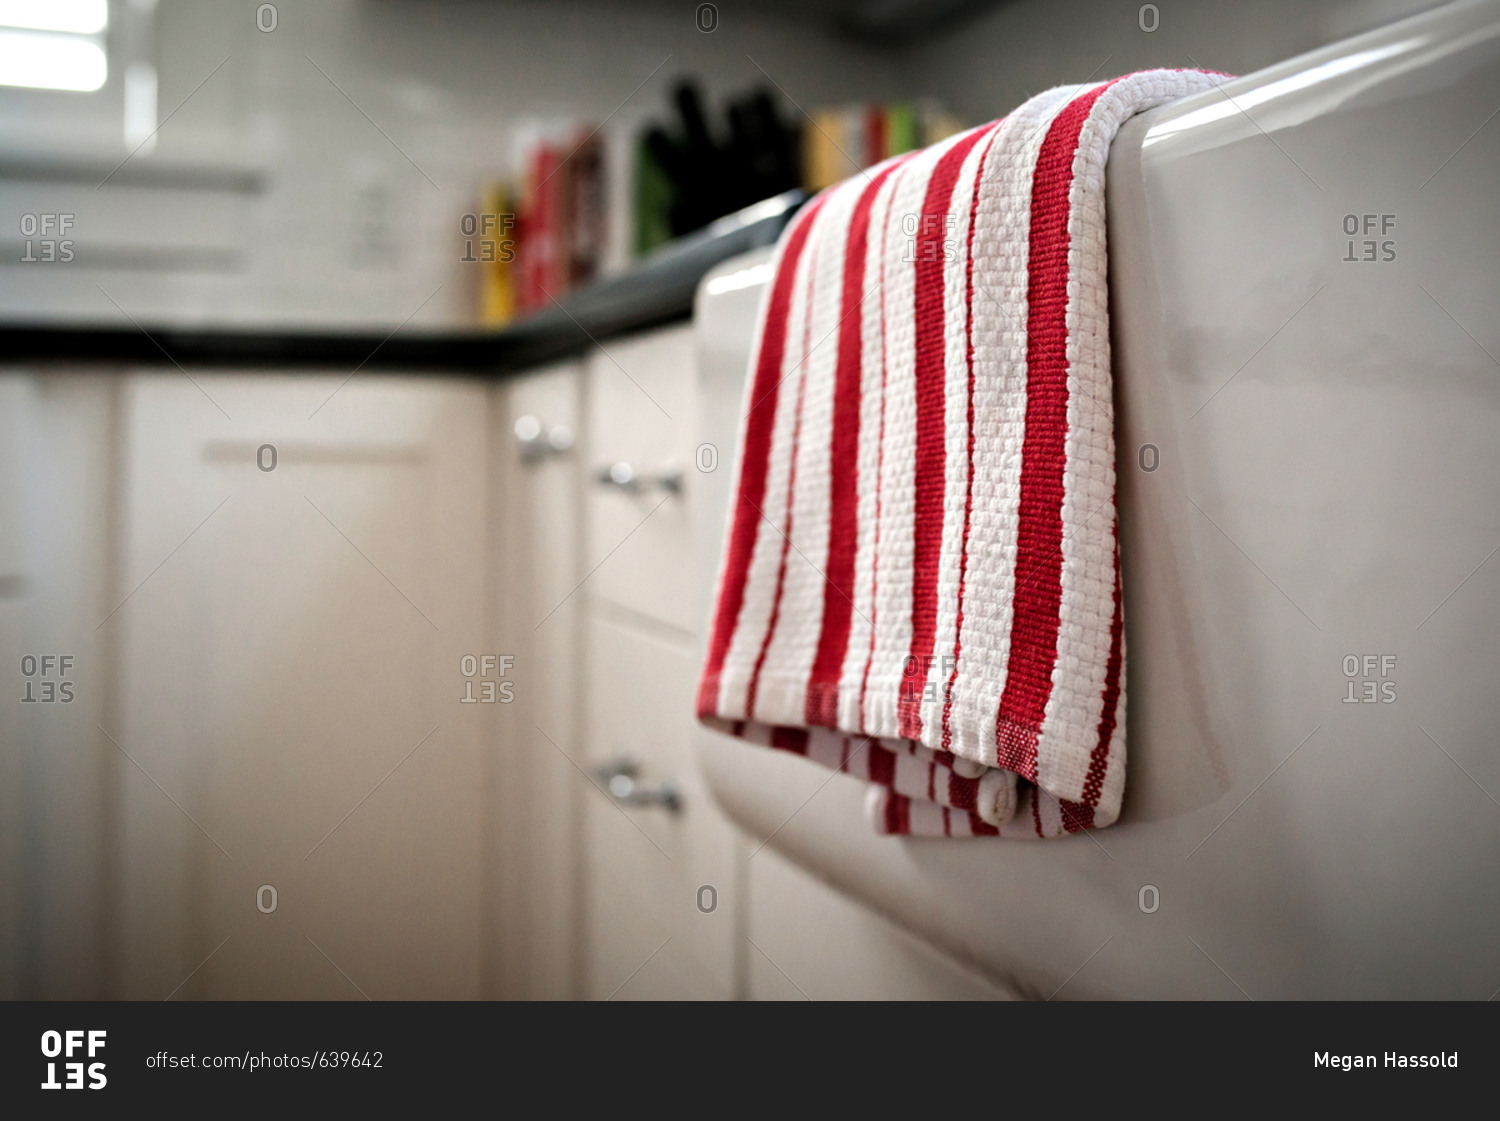 Red and white dish cloth hanging over the kitchen sink